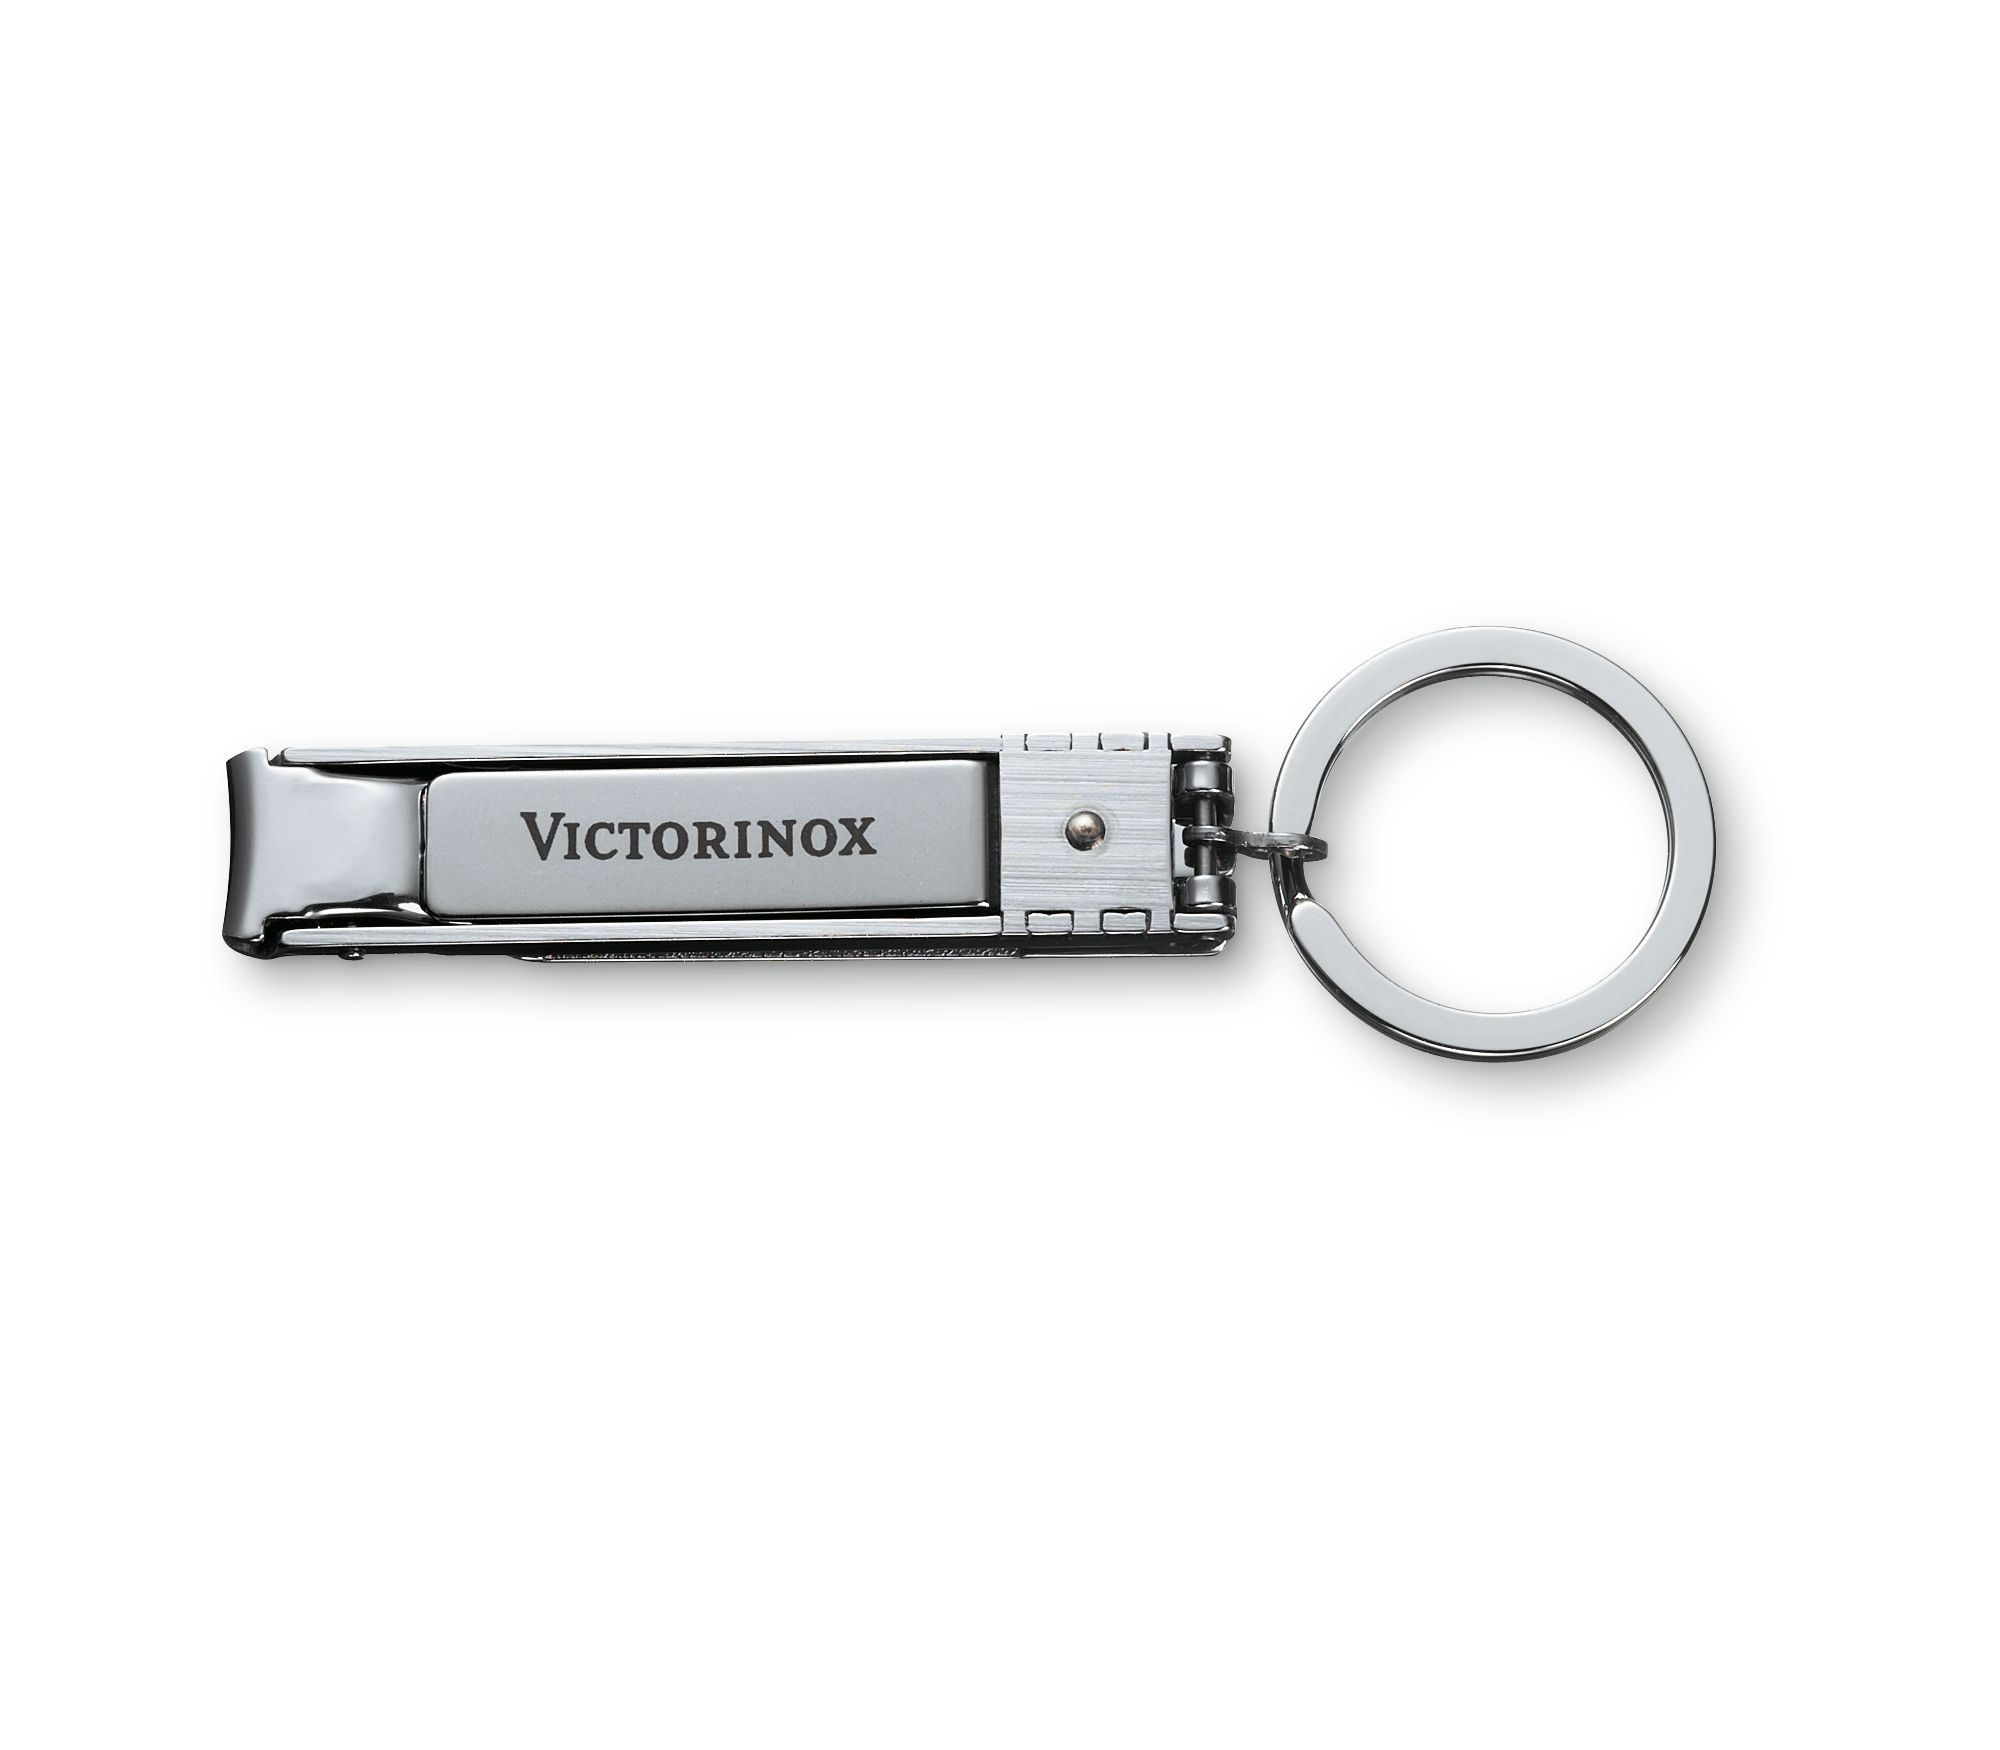 Victorinox Cucina e Accessori :: Kitchen Articles :: Kitchen Shears ::  Victorinox - Nail Clipper Stainless Steel with Key Ring Chain